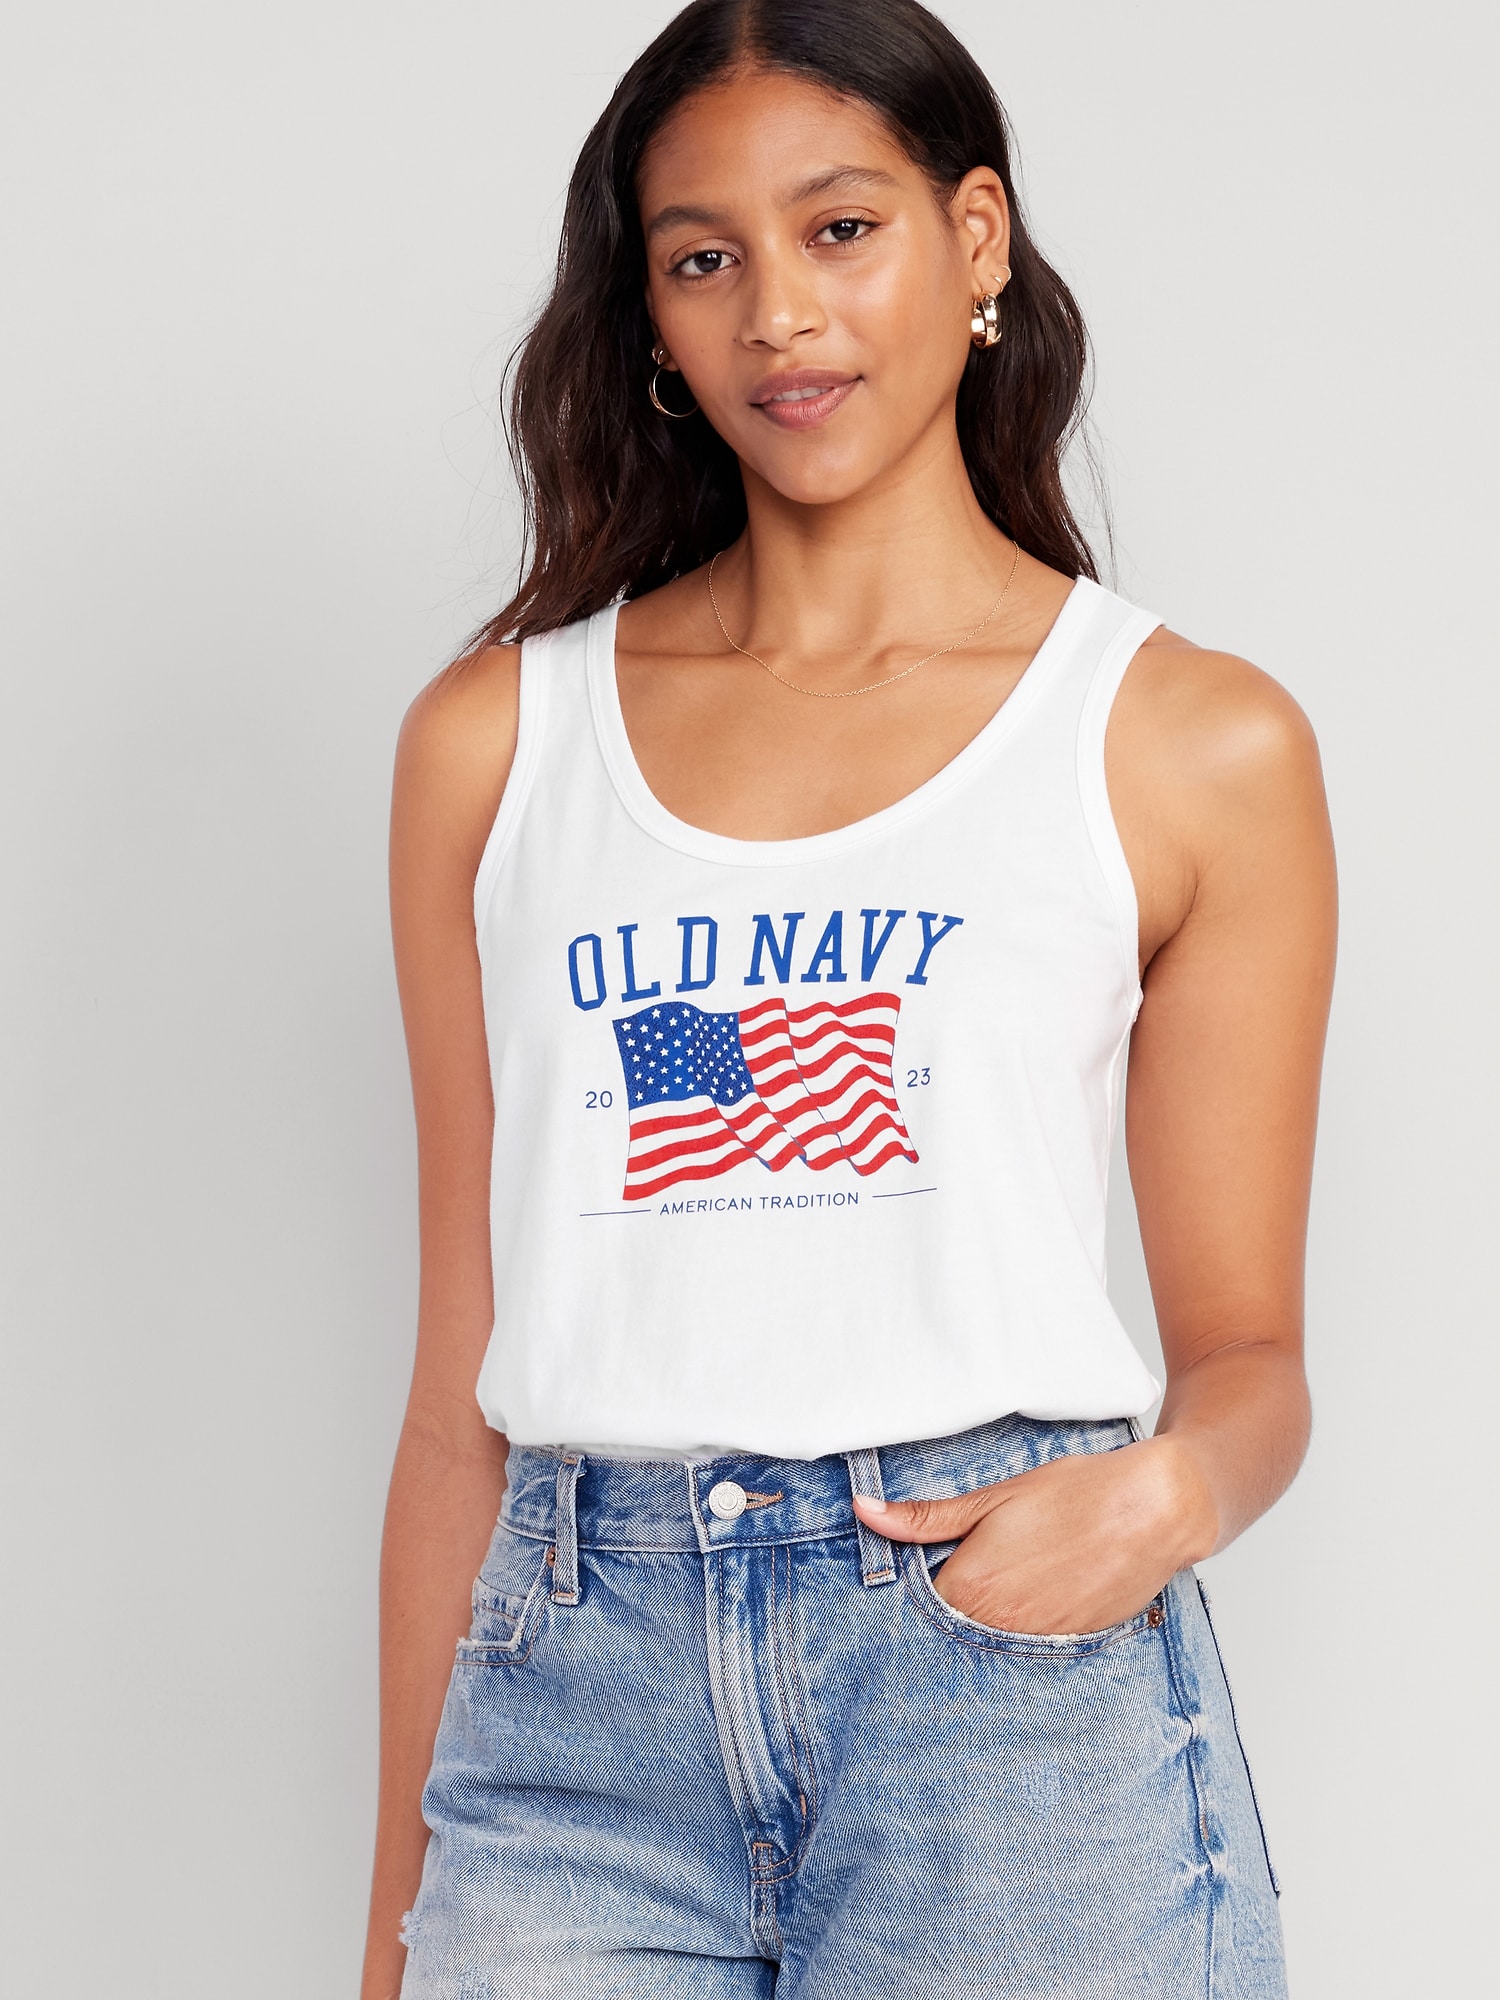 Old Navy Matching "Old Navy" Flag Tank Top for Women white. 1